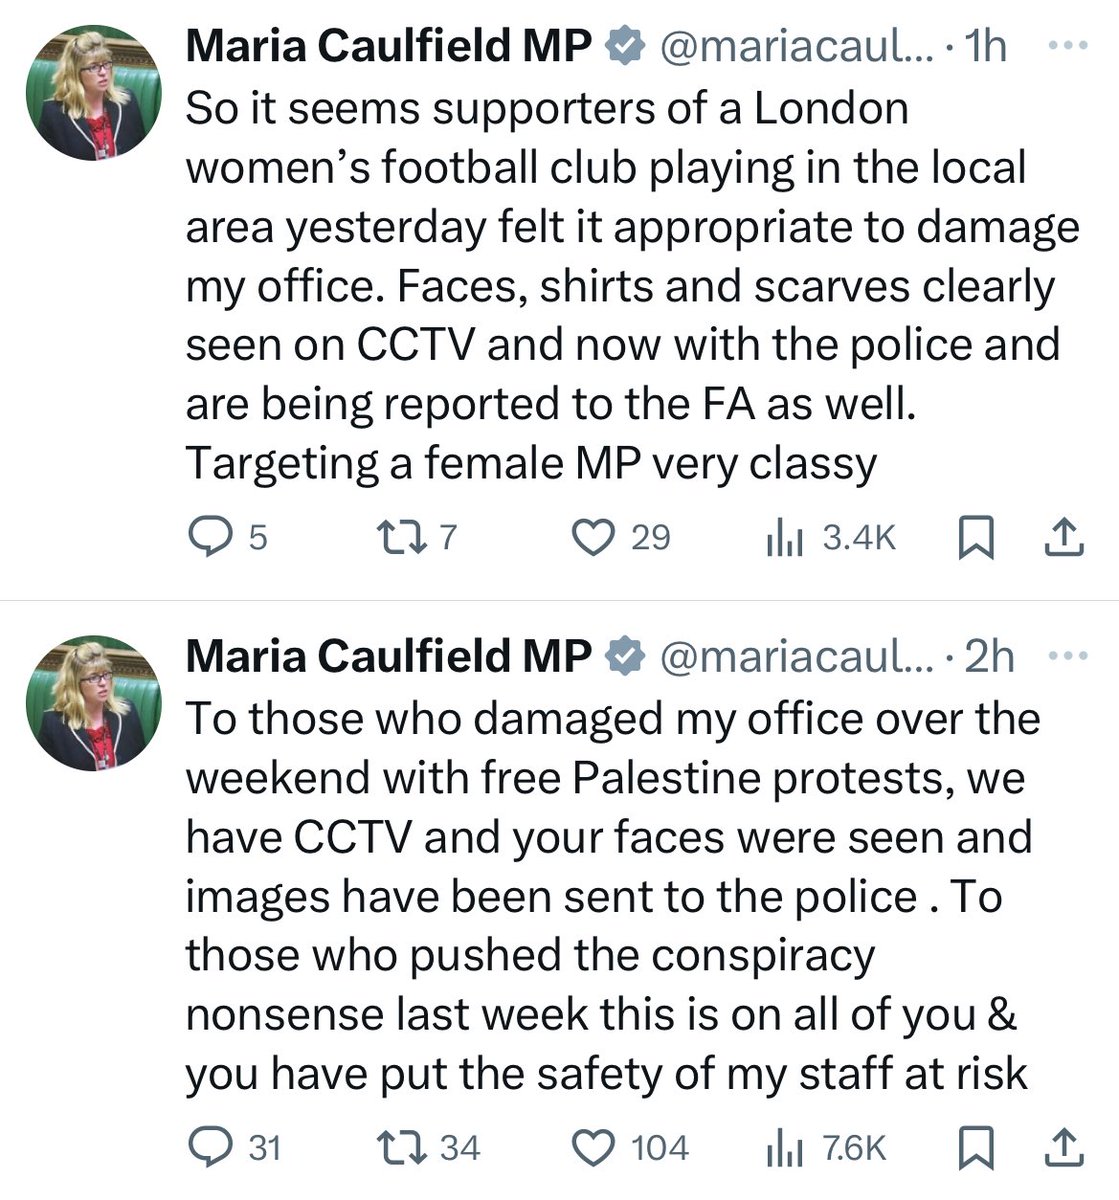 Which of these is the correct story please @mariacaulfield? One group of people requires an apology.